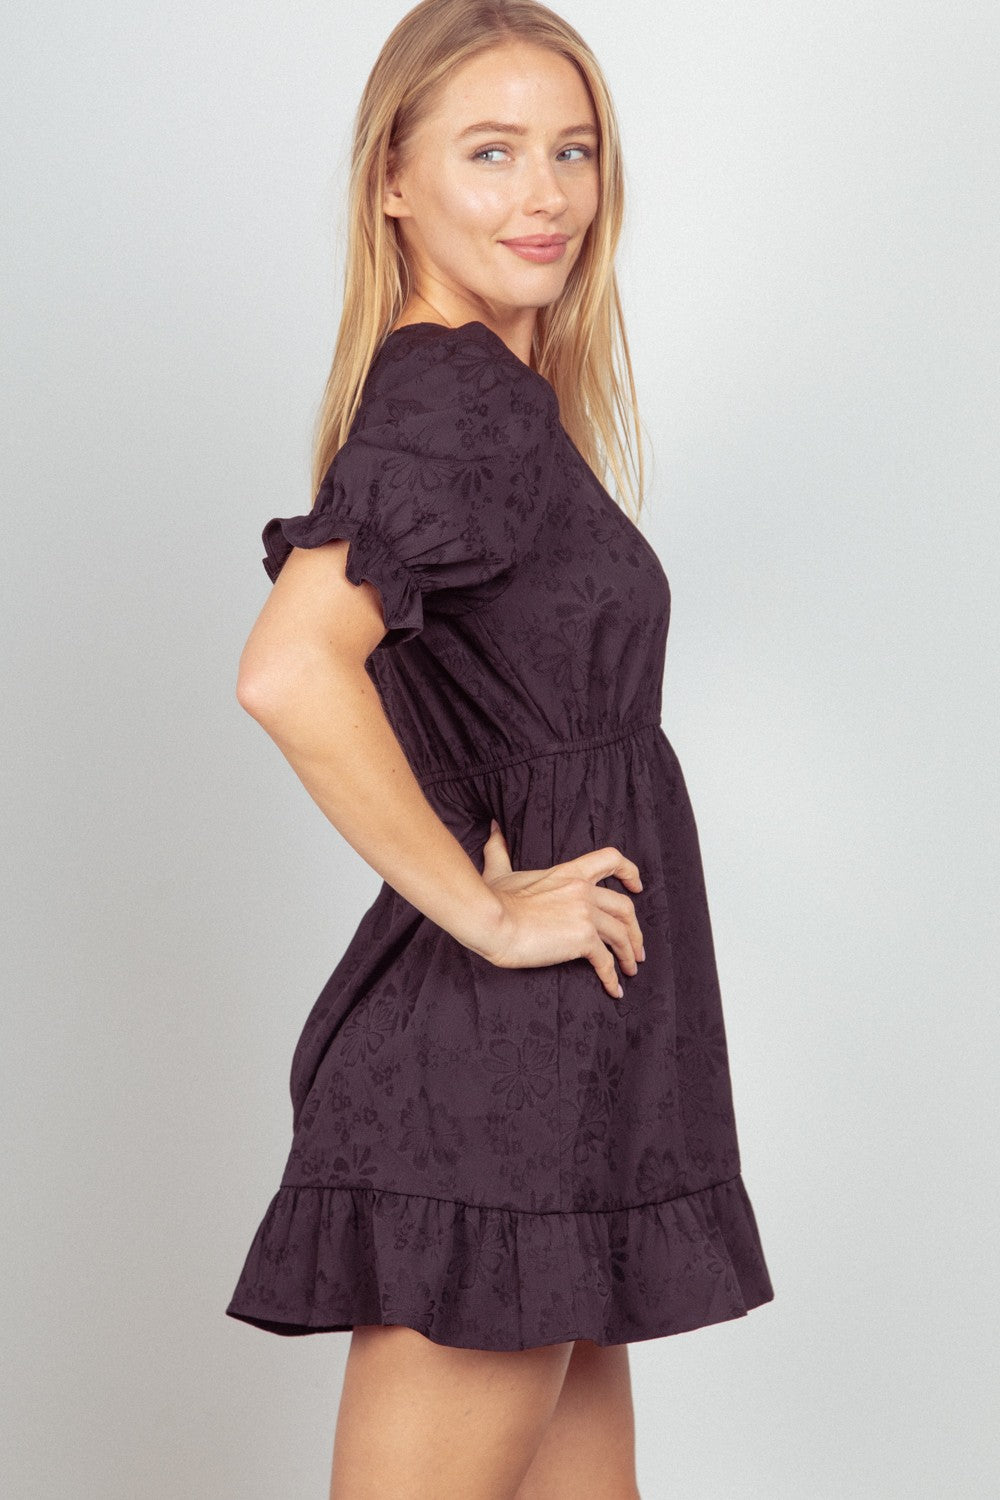 This Floral Textured Woven Ruffled Mini Dress is a charming and feminine choice for any special occasion. The floral textured fabric adds a romantic touch to the sweet ruffled details.  S - L